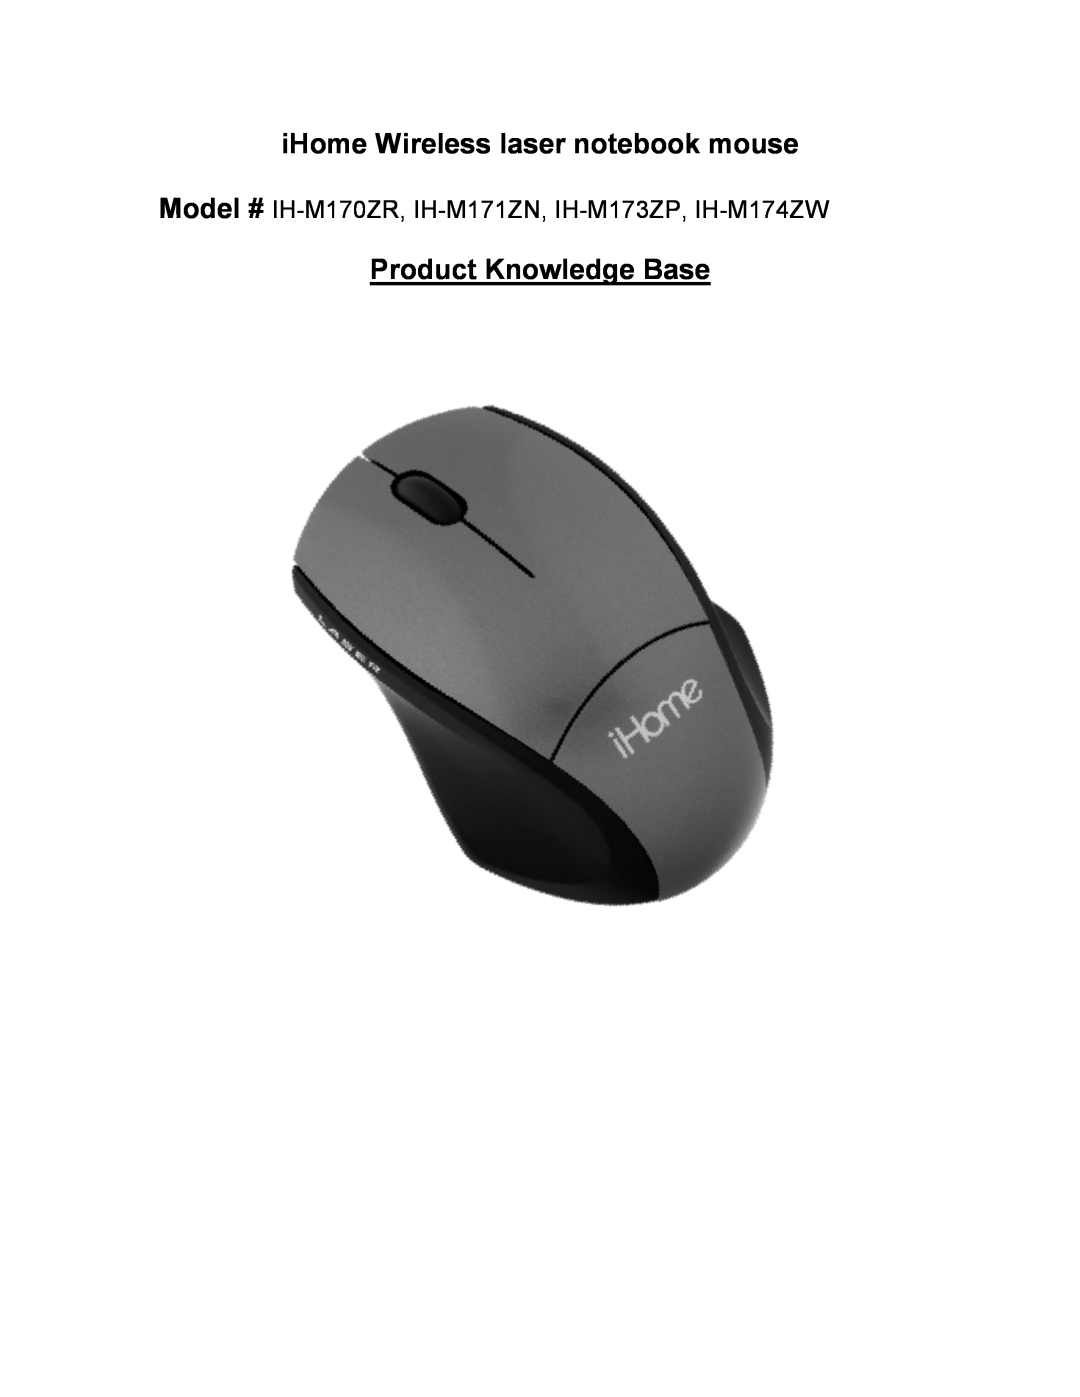 iHome manual Model # IH-M170ZR, IH-M171ZN, IH-M173ZP, IH-M174ZW, iHome Wireless laser notebook mouse 